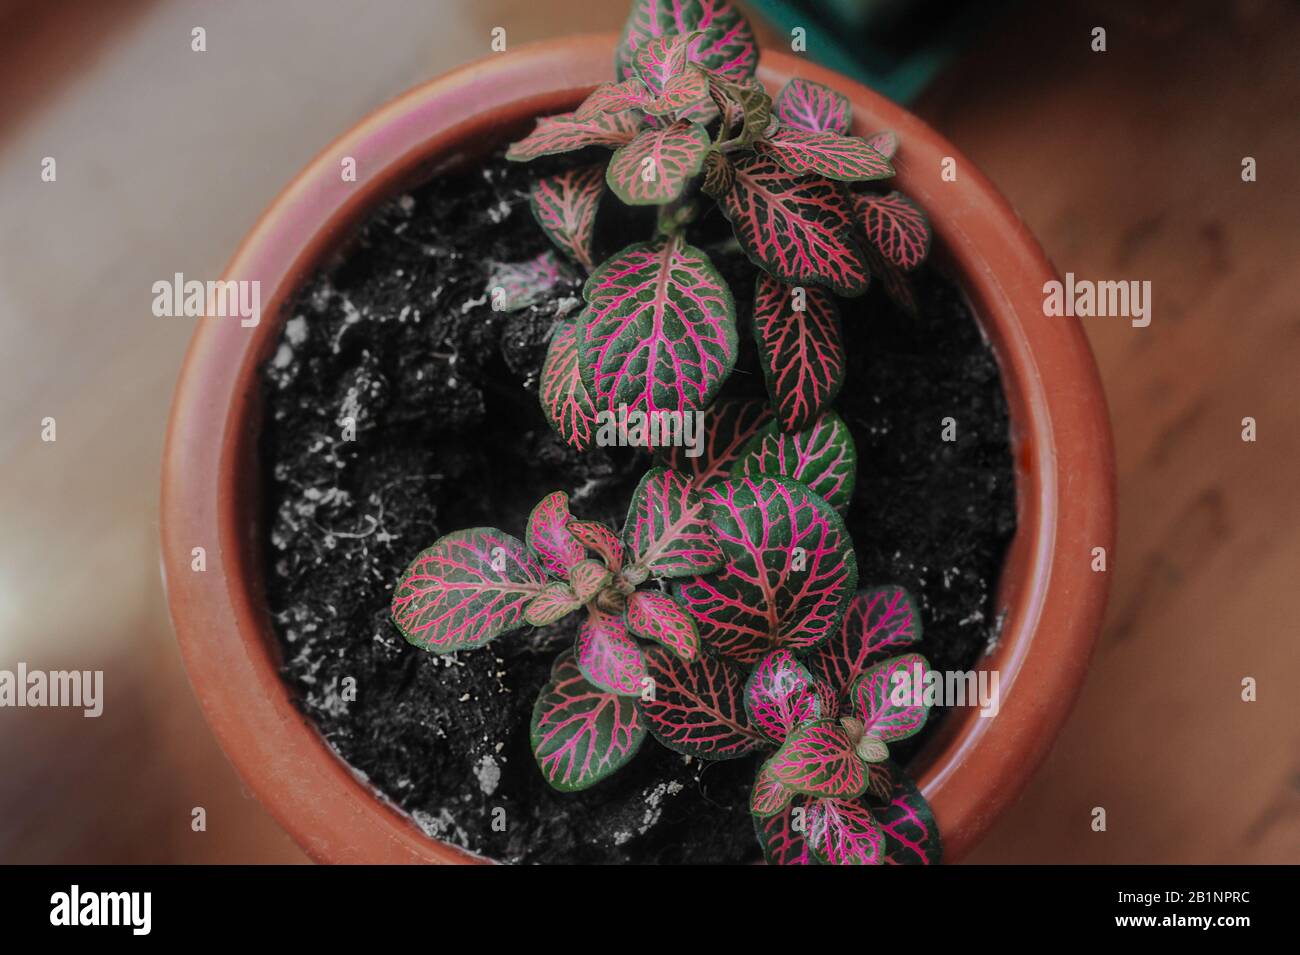 home gardening in full bloom, blossoming pink fittonia flowers grow from a pot in domestic conditions top view Stock Photo